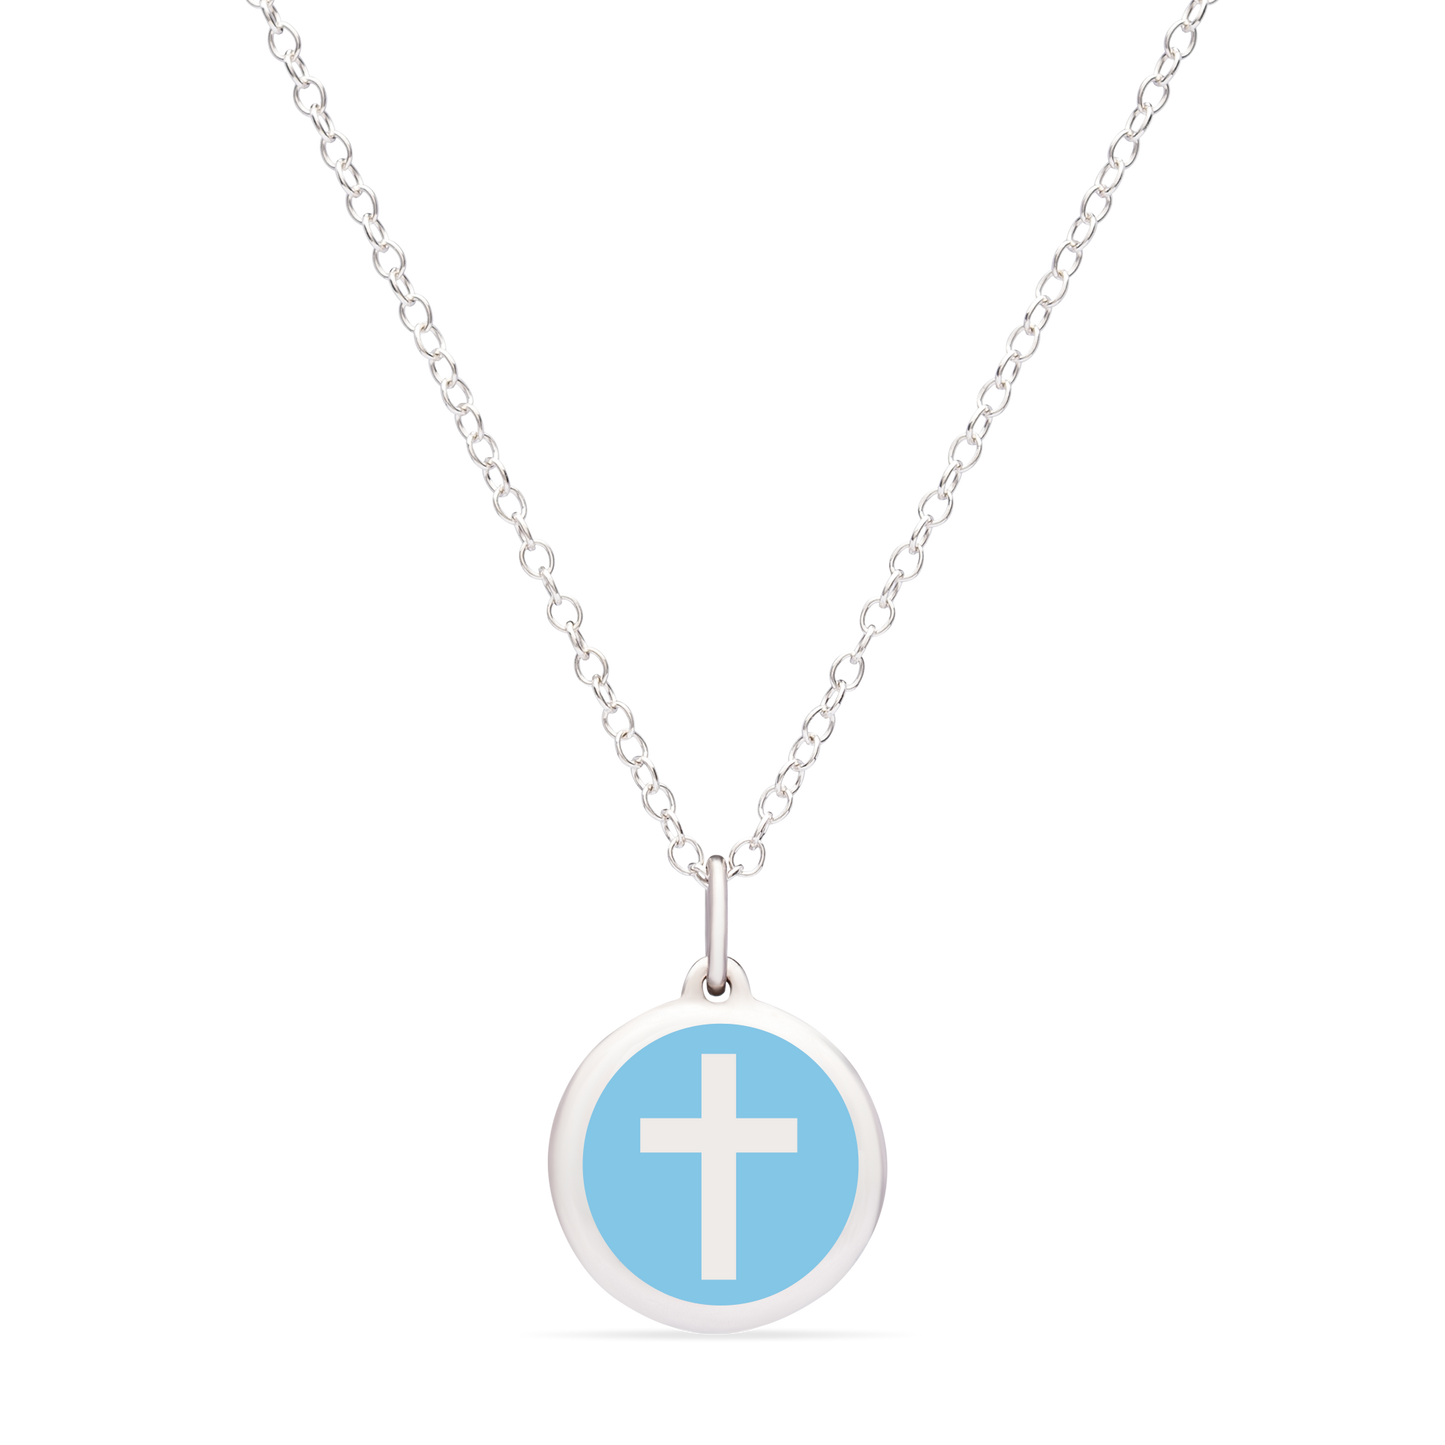 MINI CROSS CHARM sterling silver with rhodium plate